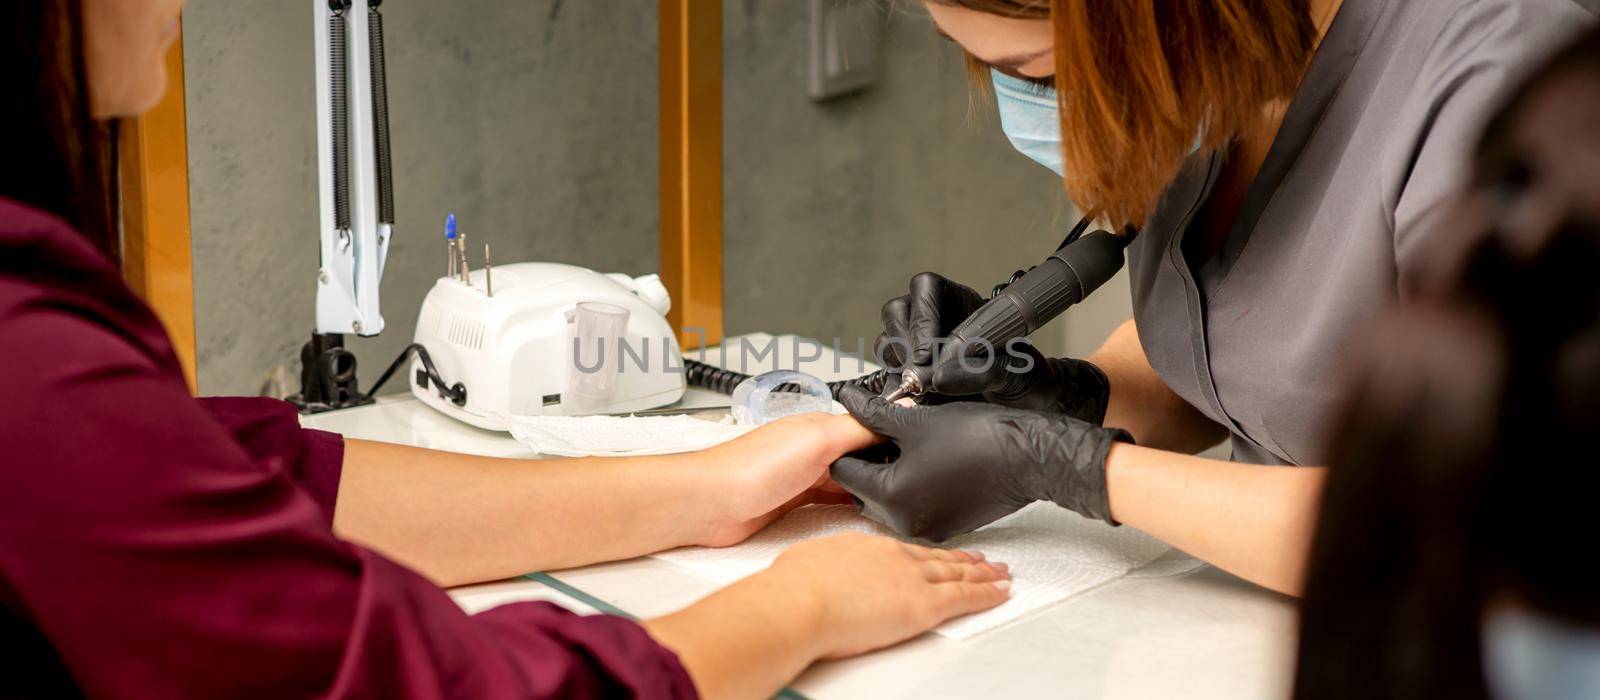 Manicure master wearing protective mask uses electric nail file machine in a nail salon, close up